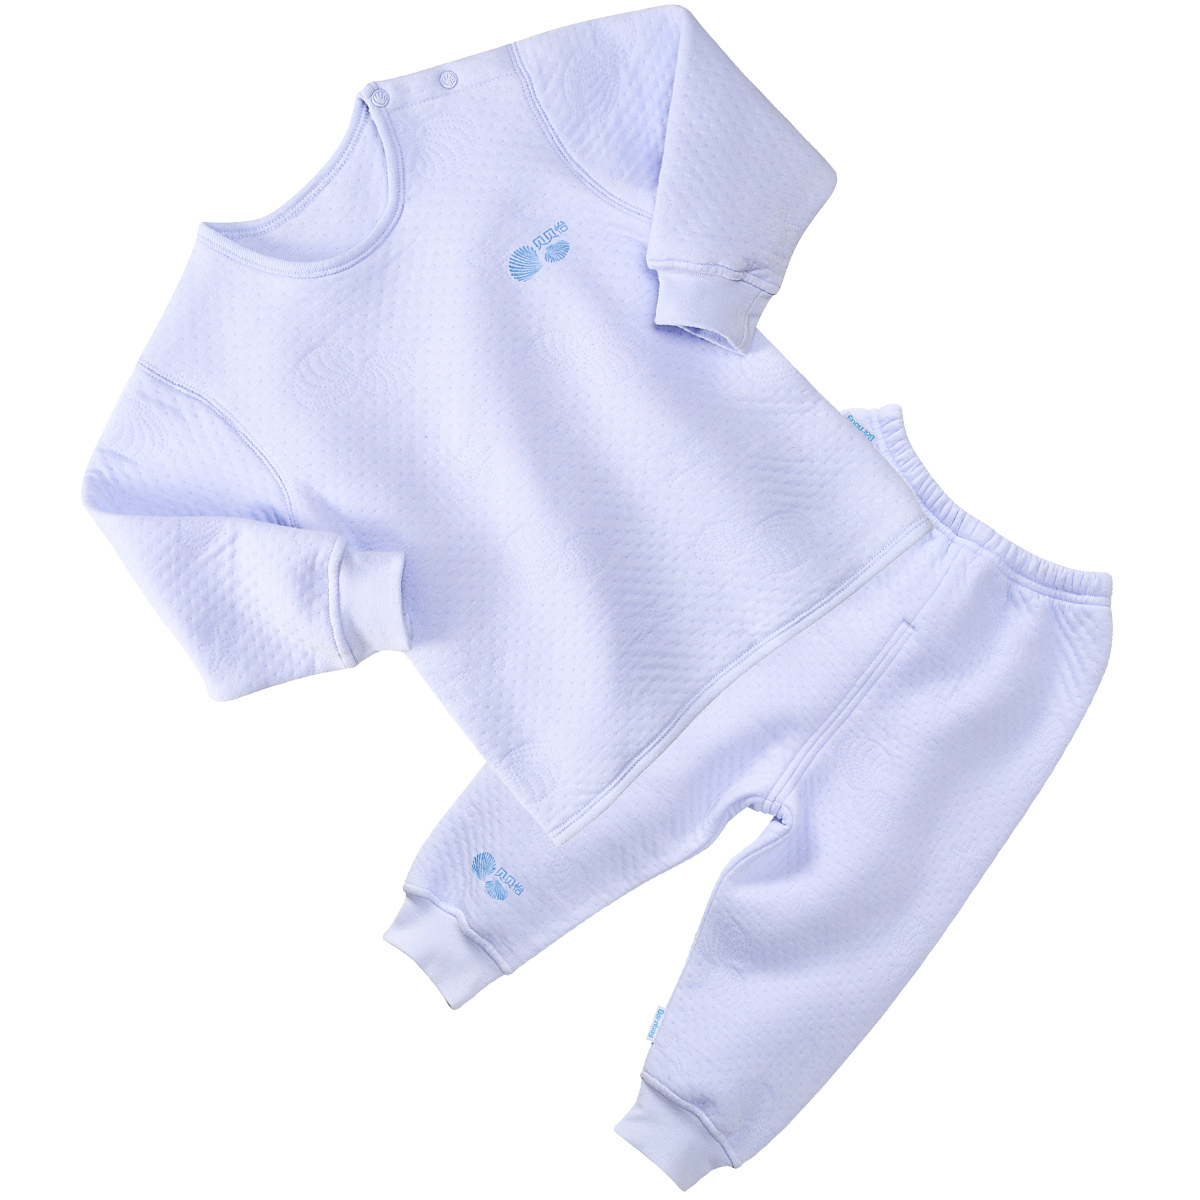 Baby thermal underwear set autumn and winter 100% cotton baby long johns set thickening 8018